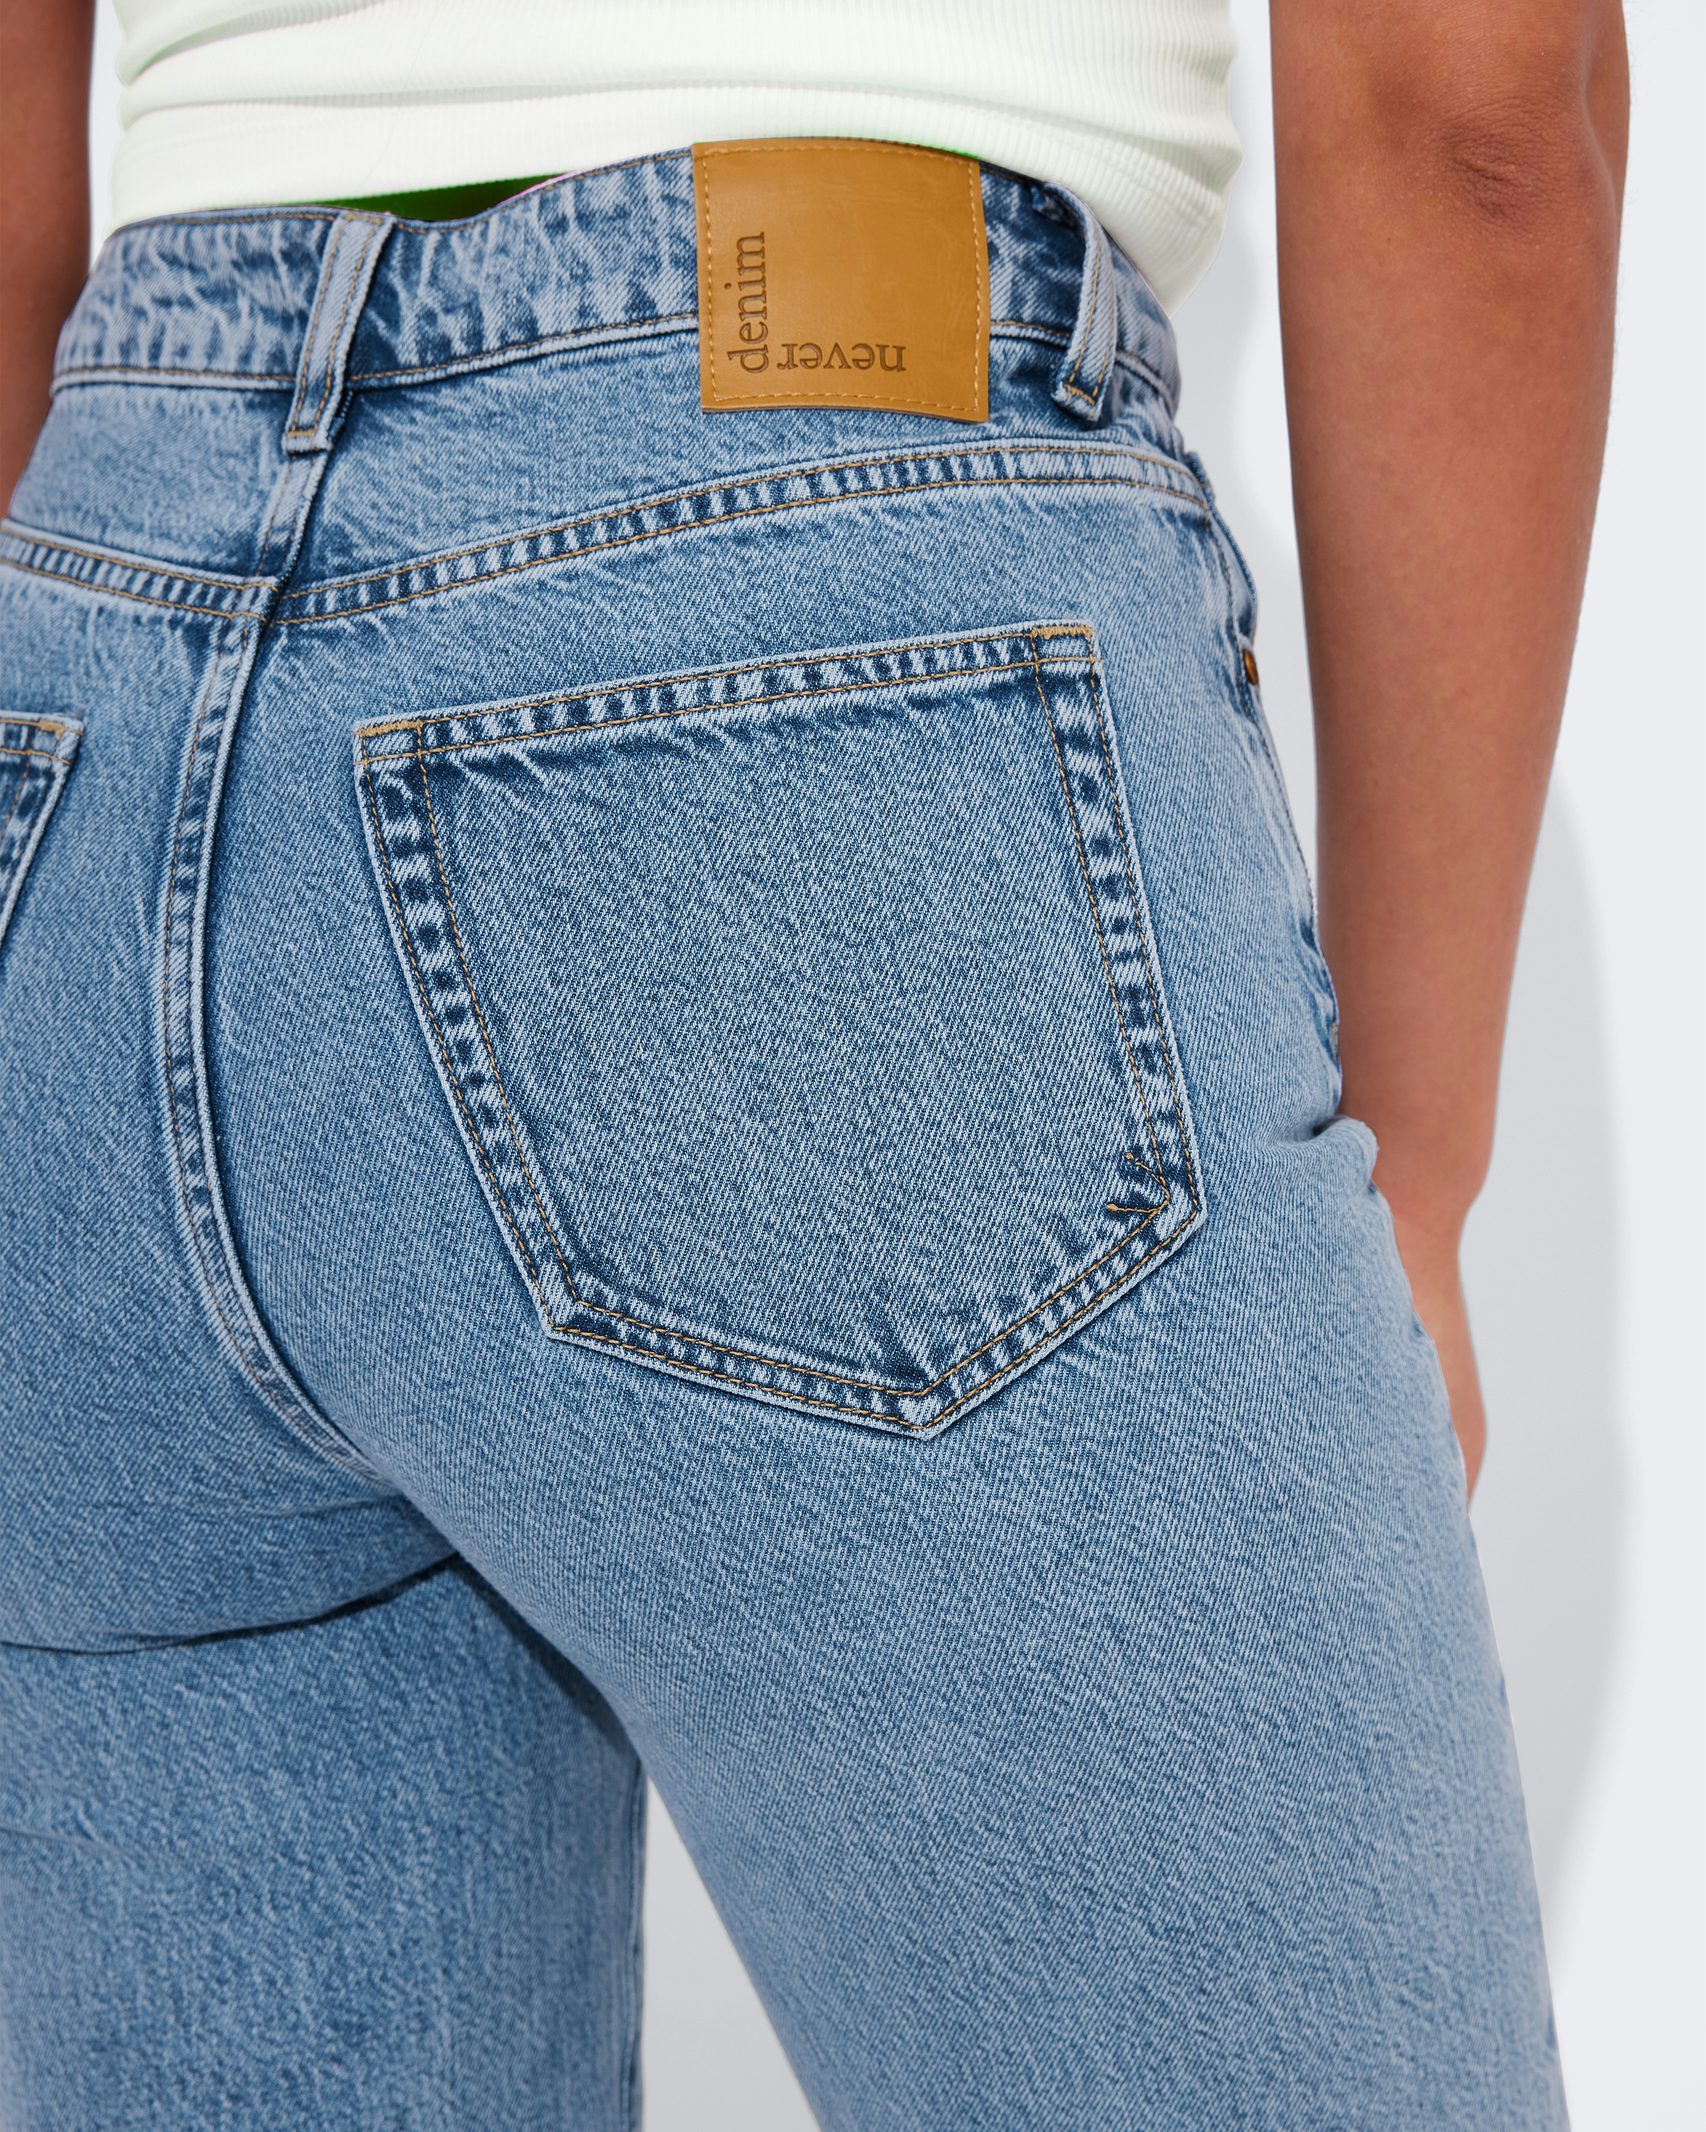 Levis 550 Womens Jeans Cheapest Order, Save 51% 